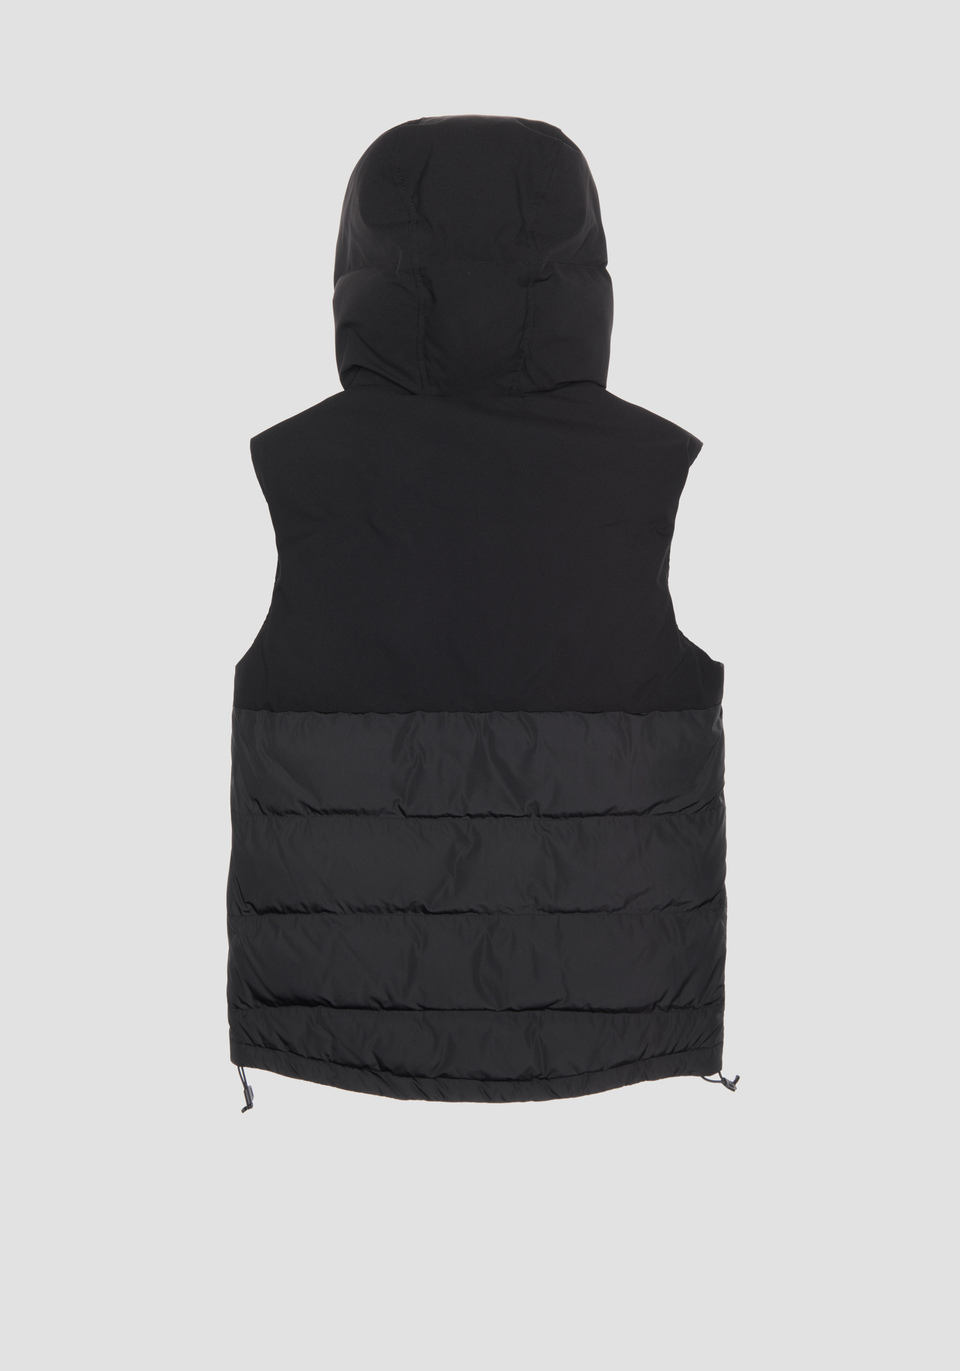 REGULAR FIT SLEEVELESS JACKET IN TECHNICAL FABRIC WITH HOOD - Antony Morato Online Shop